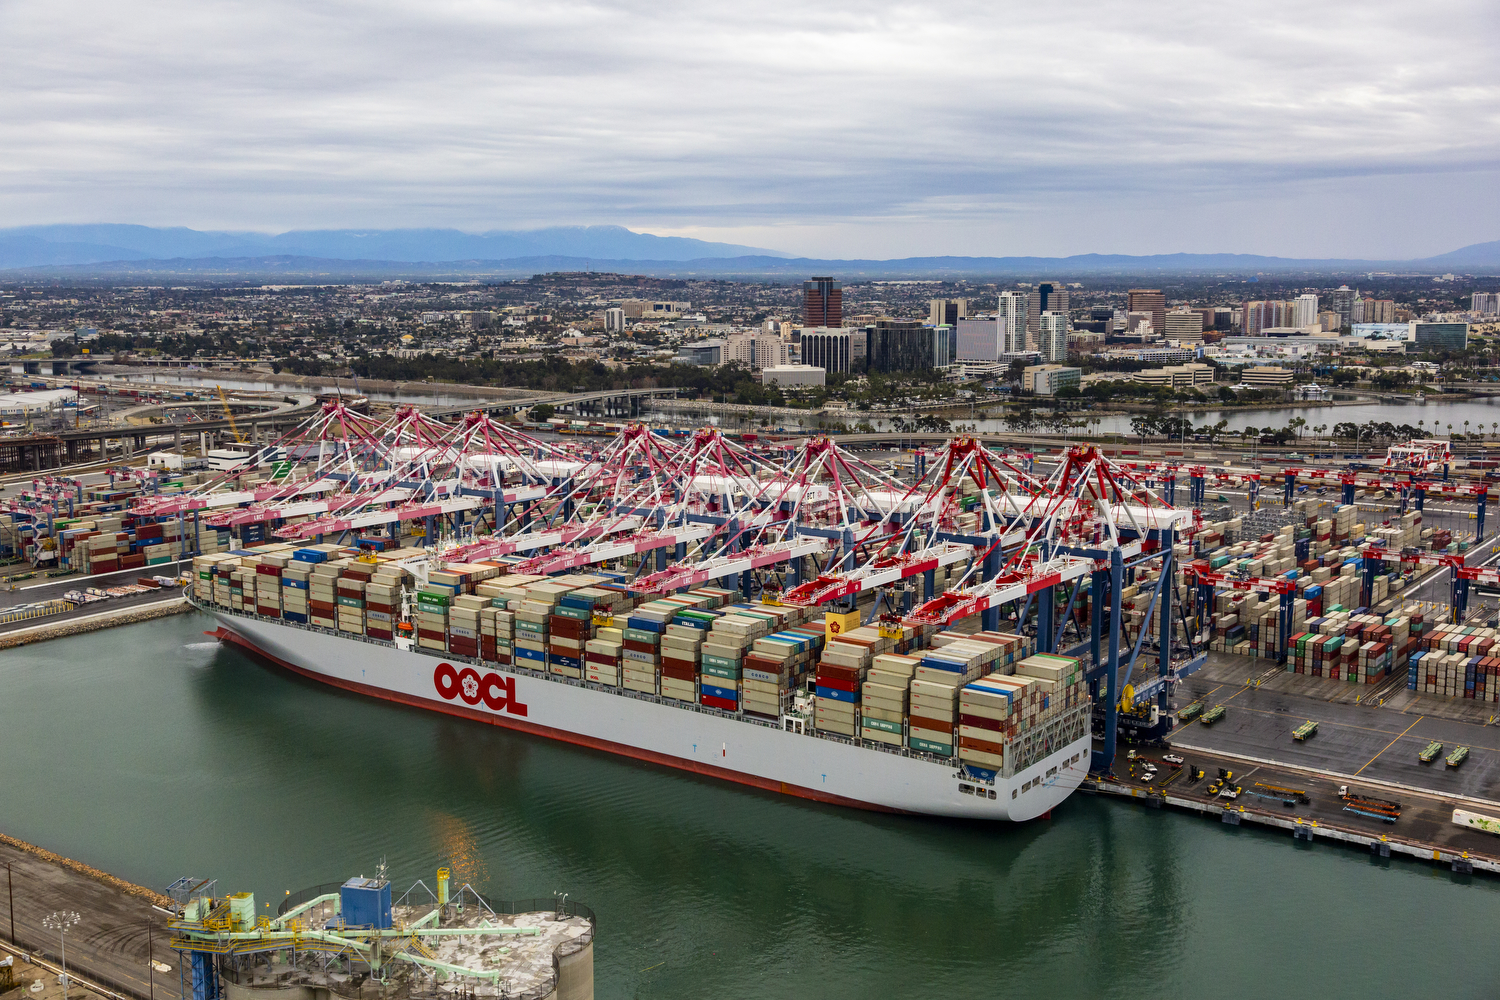 The 13,200 OOCL Malaysia is docked at Long Beach Container Terminal in 2018. Long Beach Container Terminal is the greenest, most advanced terminal in the Western Hemisphere.